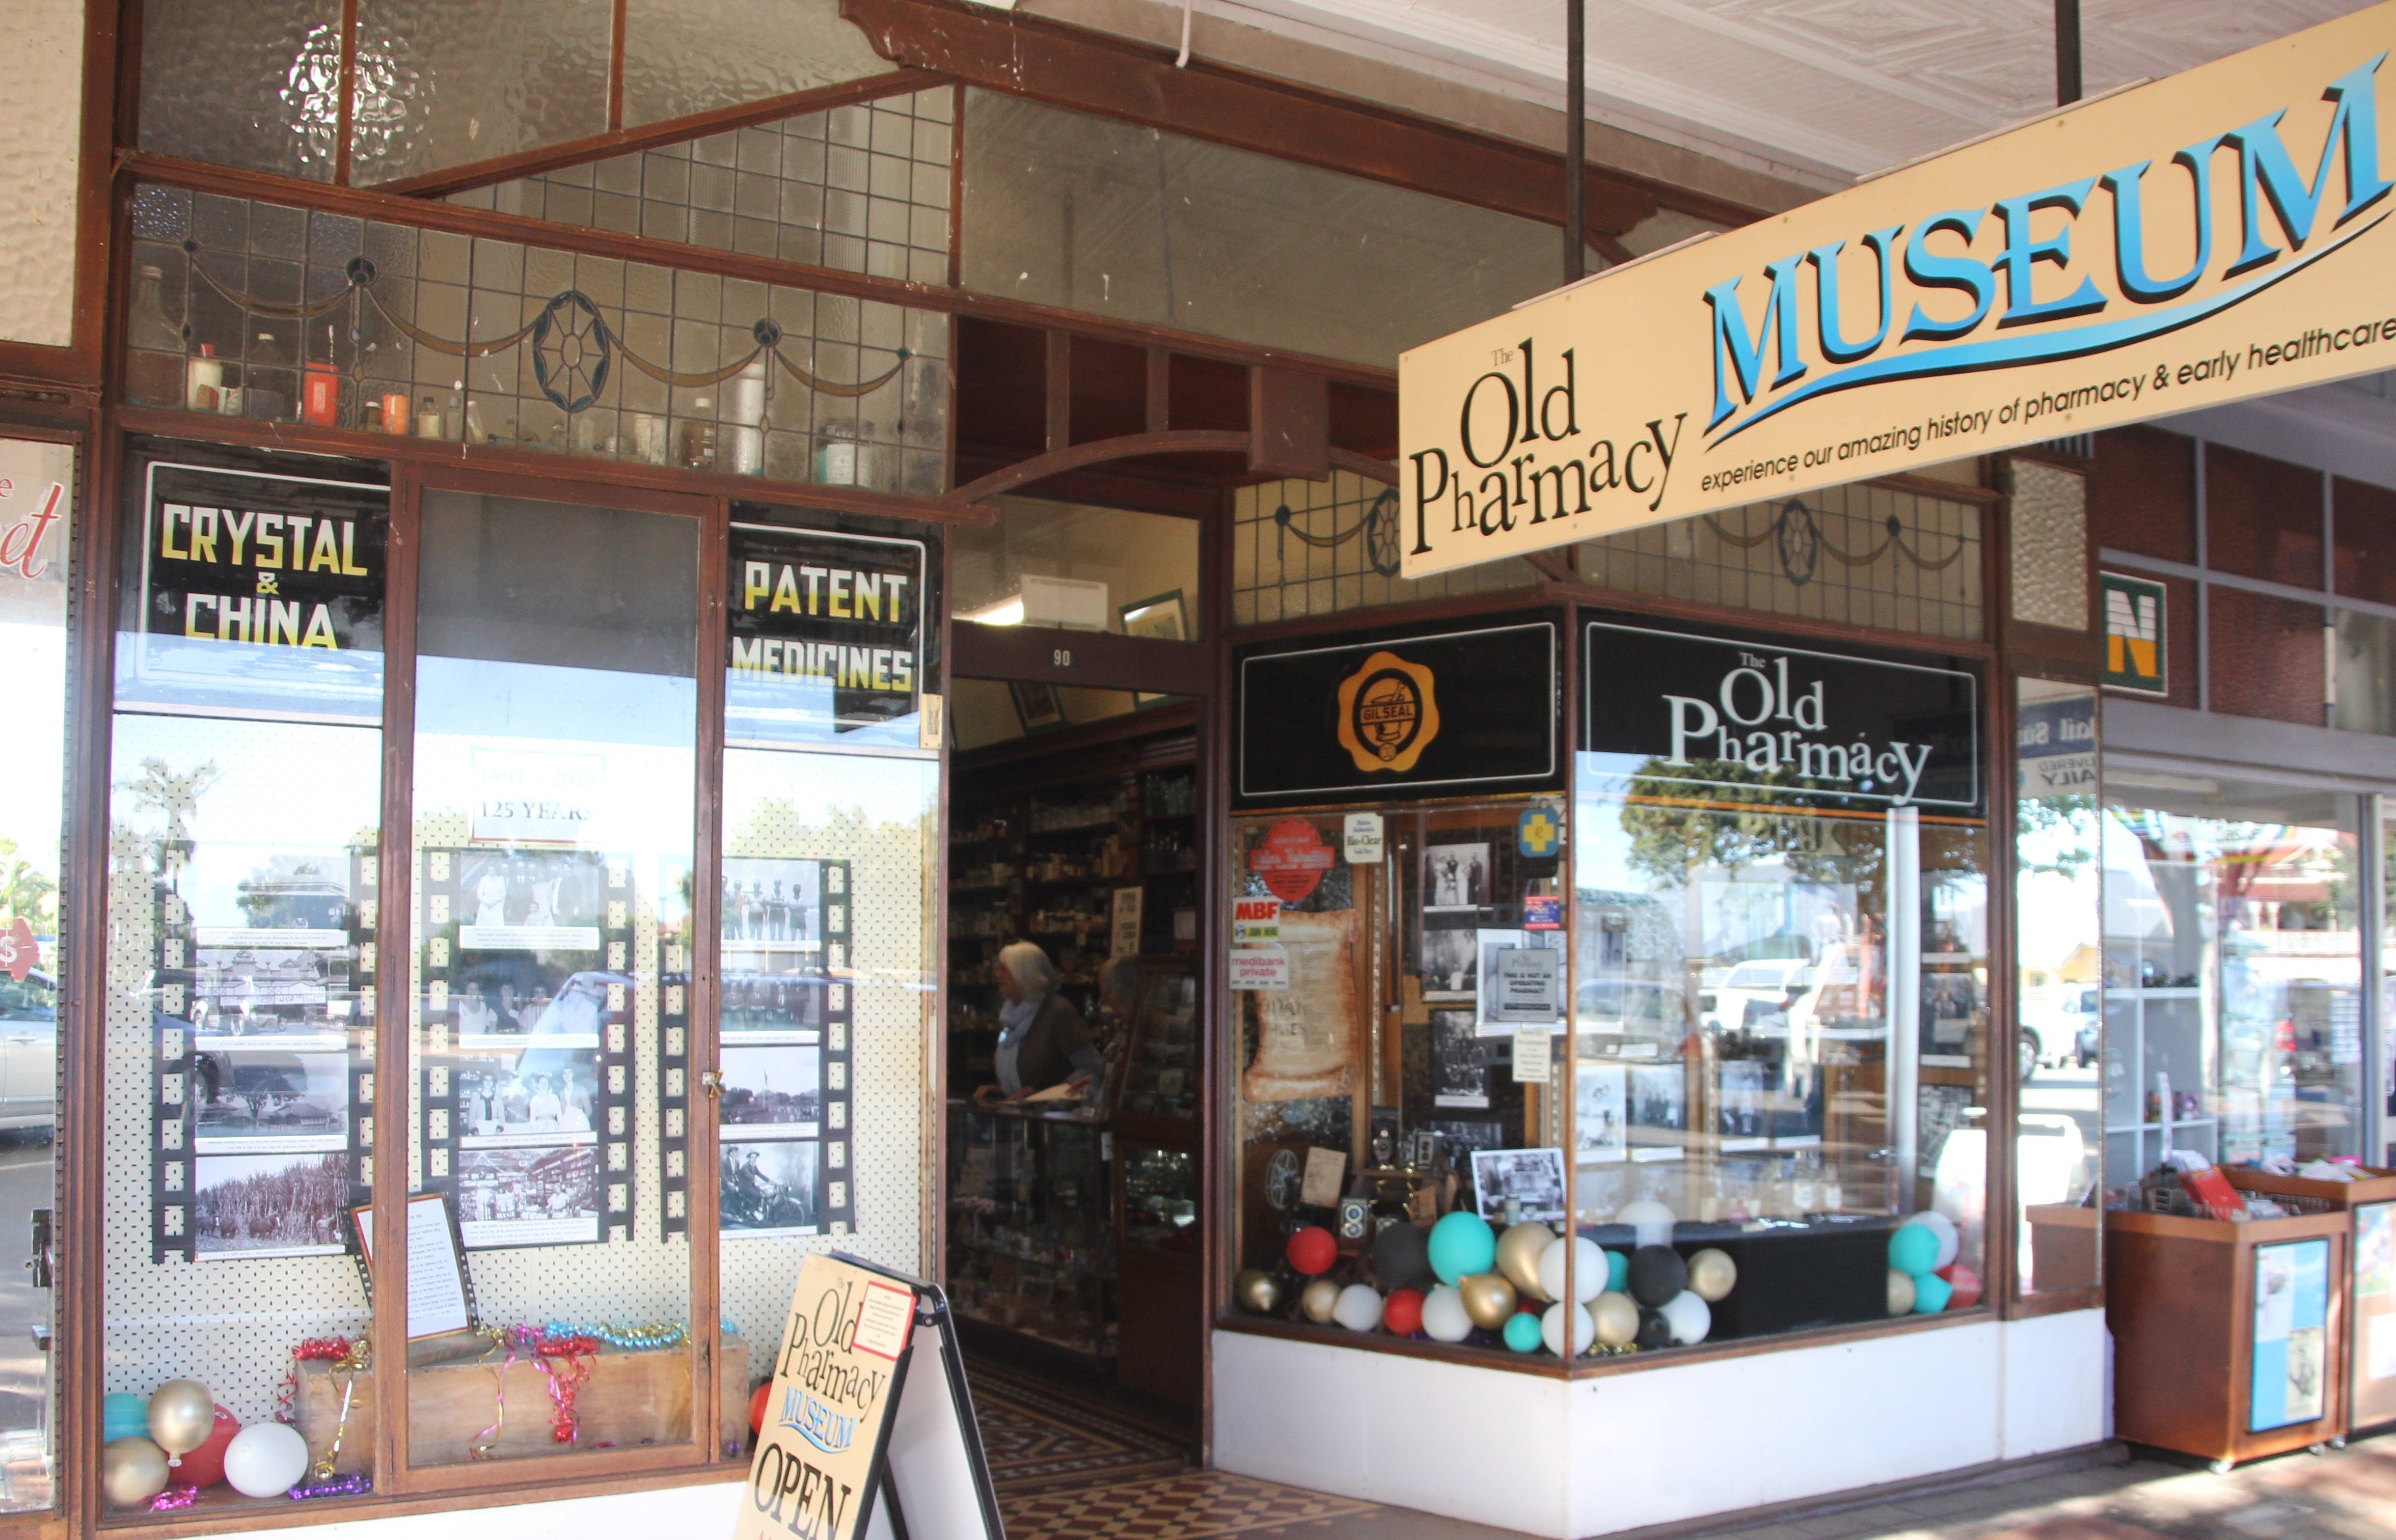 Old Pharmacy Museum  Childers - Attractions Sydney